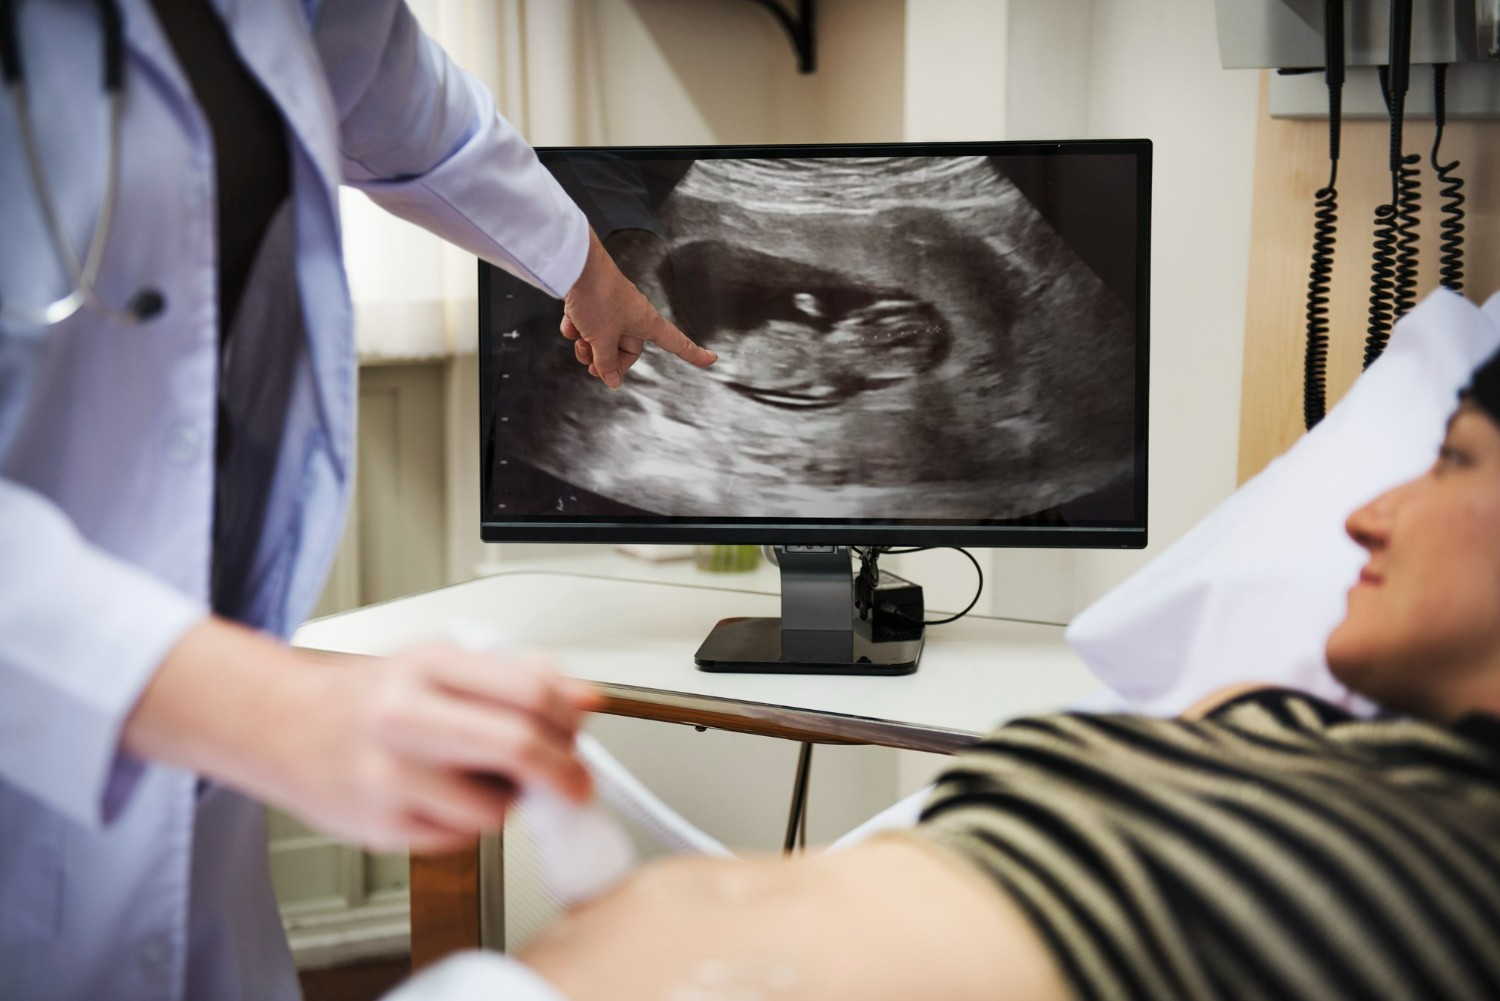 Get to Know 4 dimensional ultrasound, its Benefits, and How to Read the Results